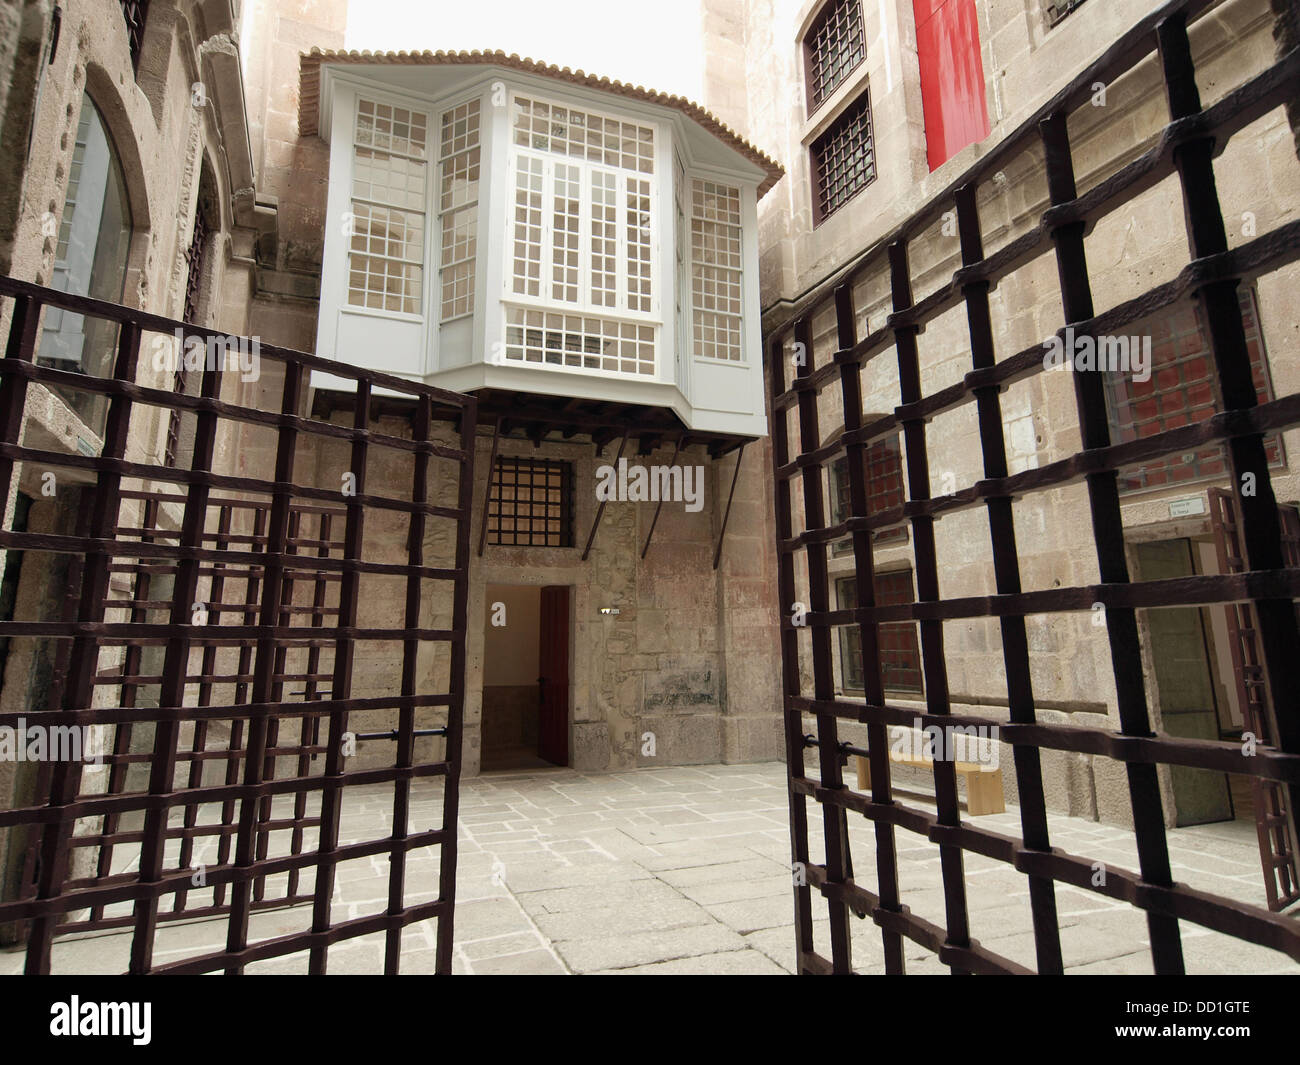 Photography Museum, former Penitentiary, Porto, Portugal Stock Photo - Alamy